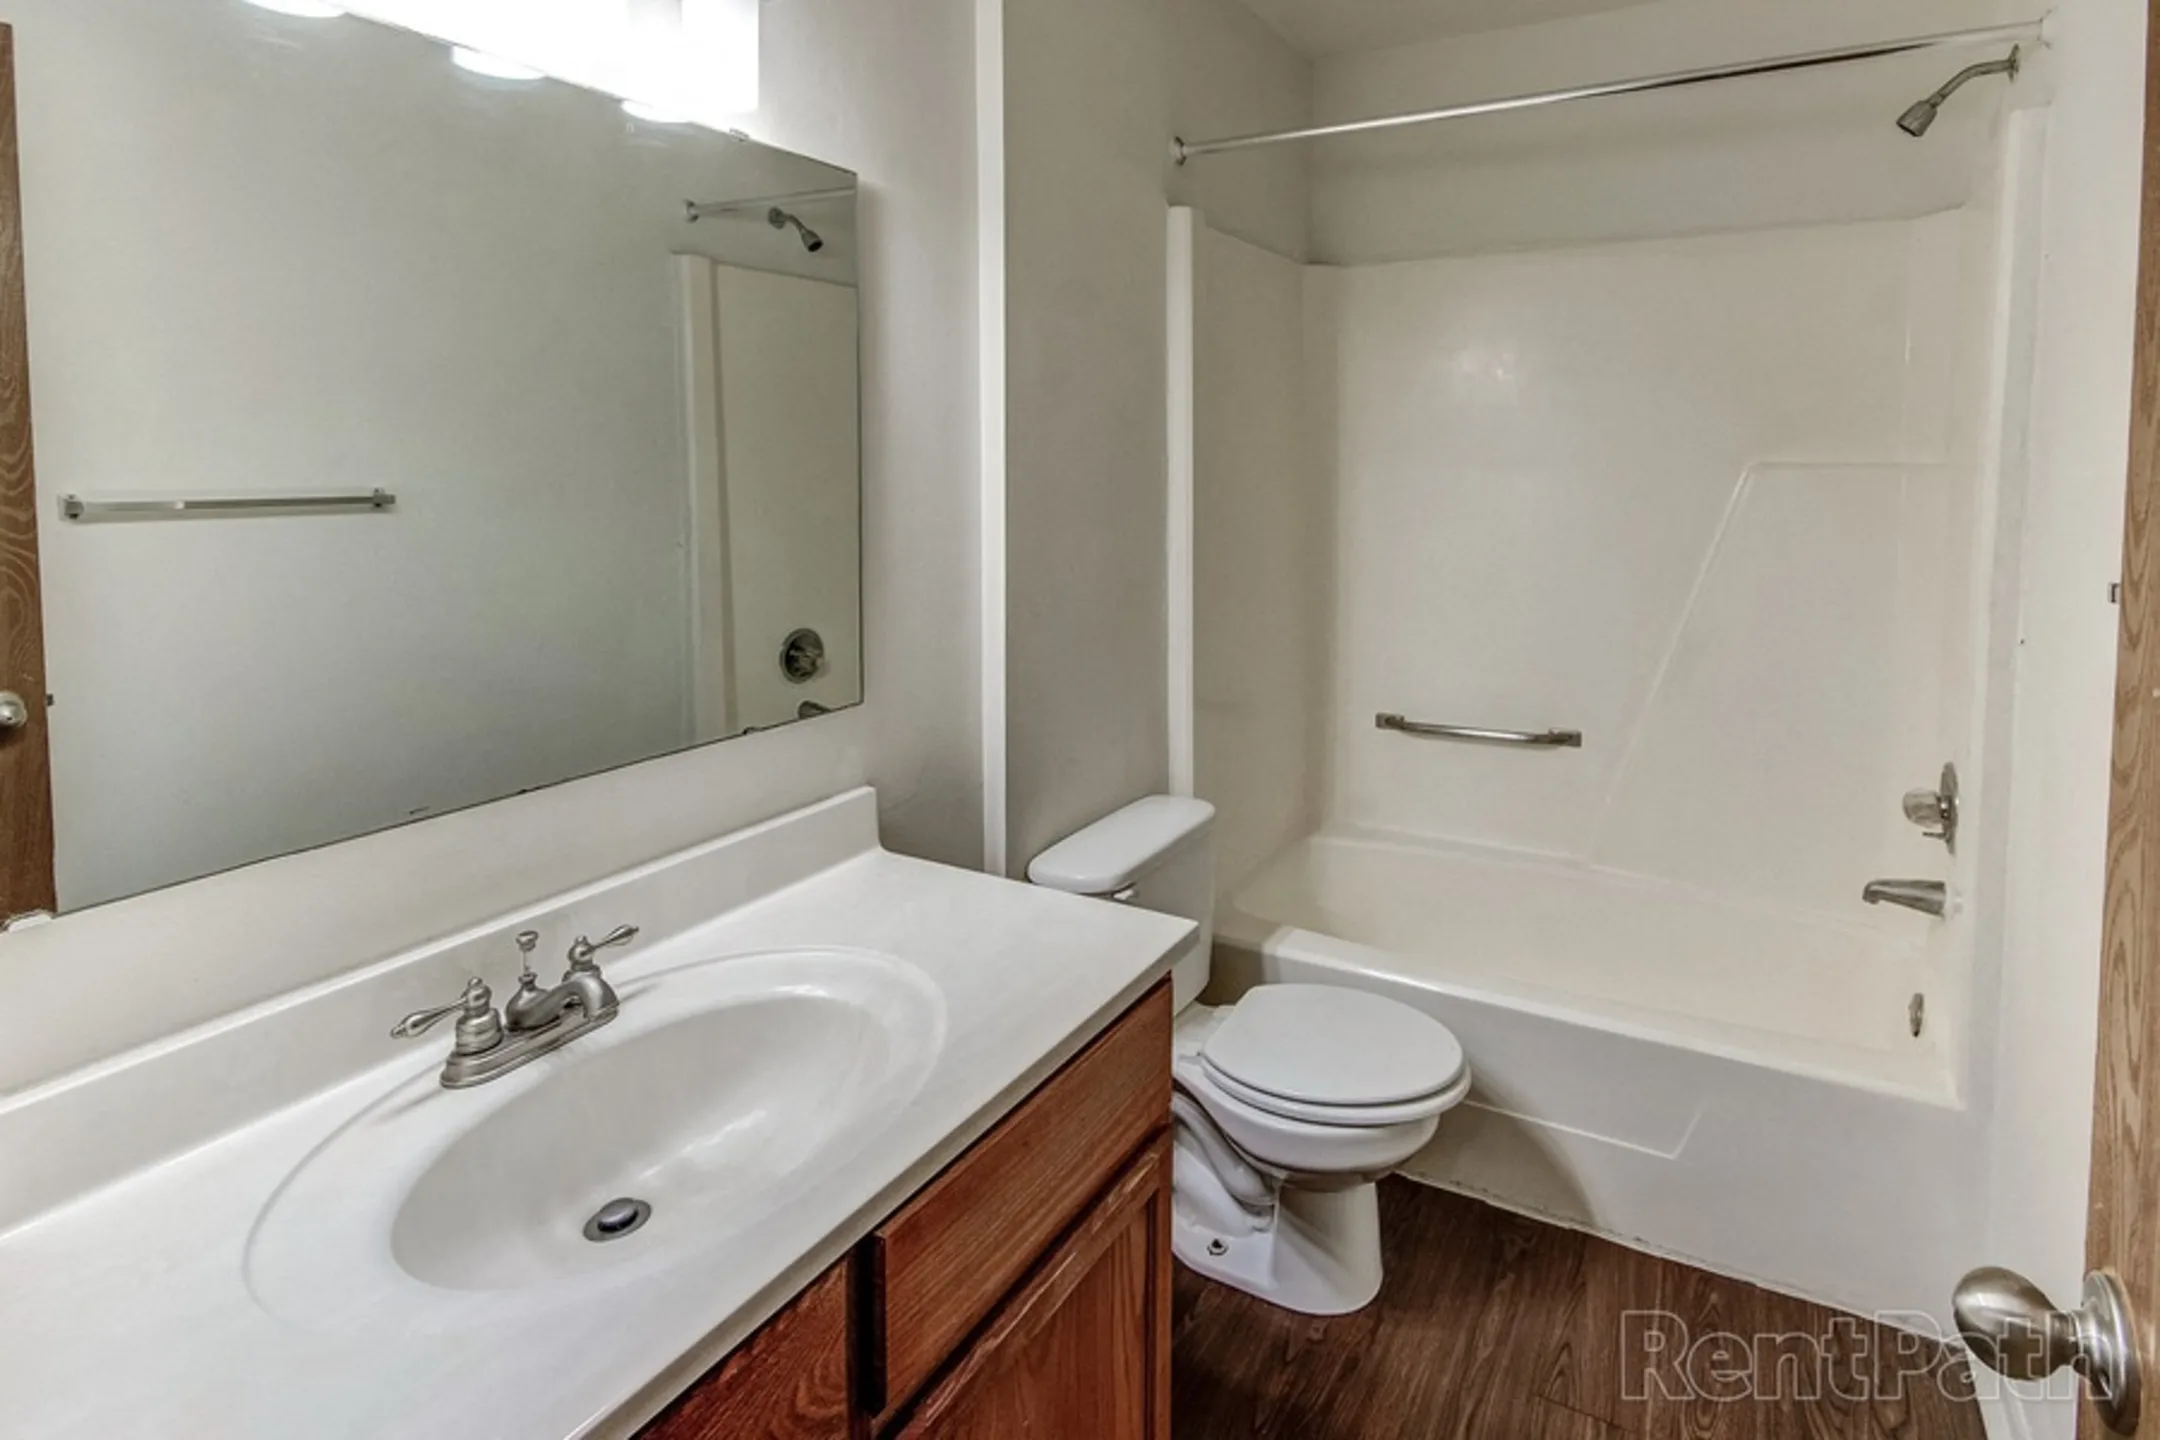 Bathroom - The Village at Sandstone Apartments - Greenwood, IN